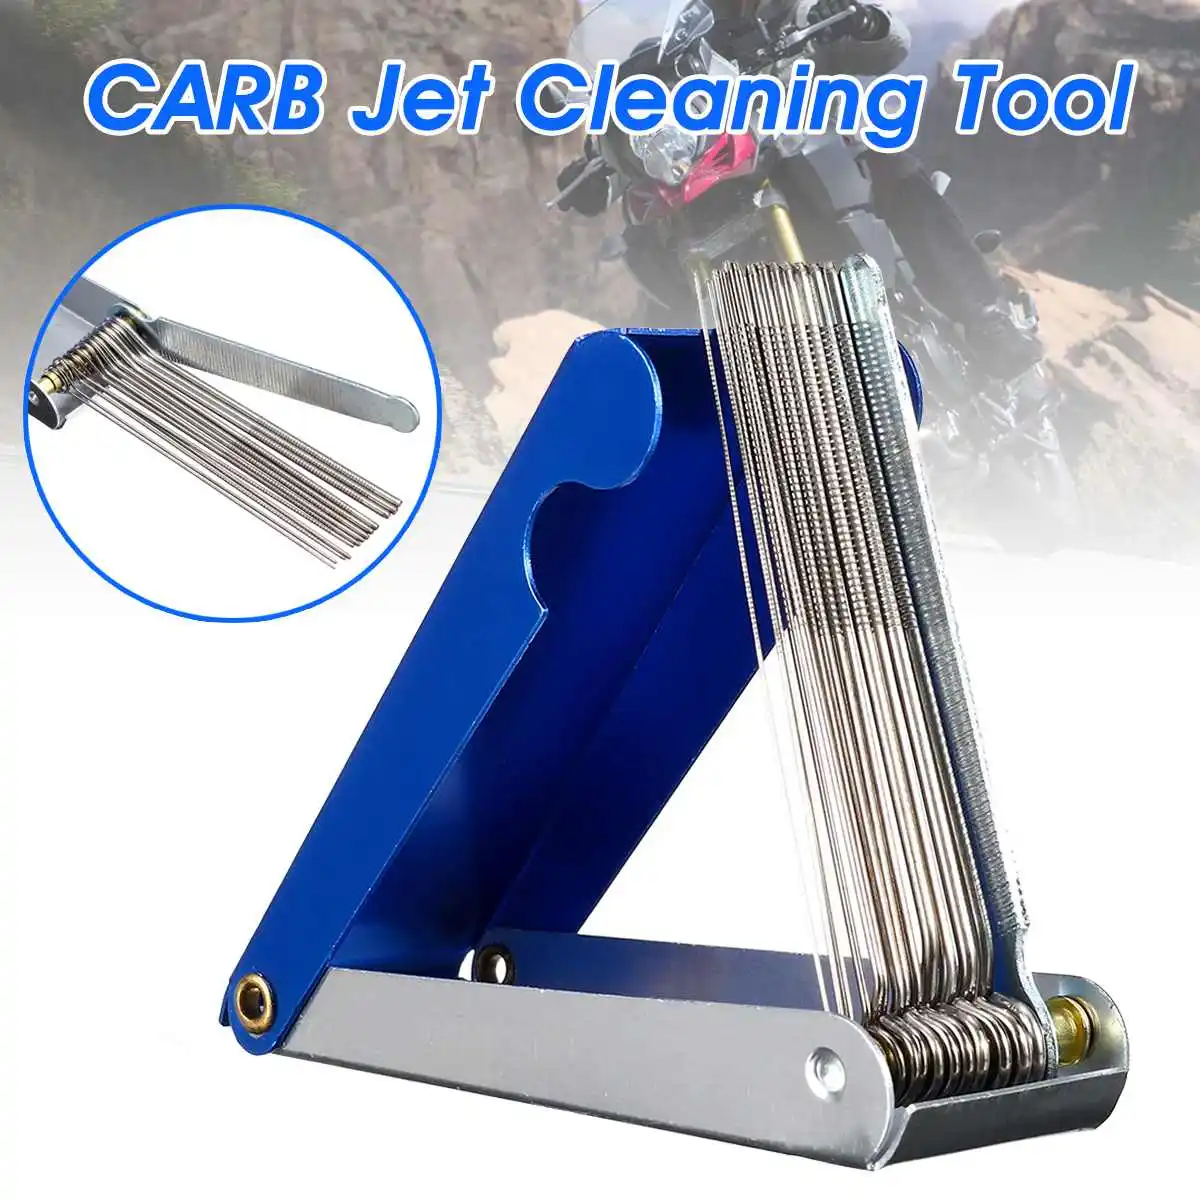 Carb Jet Cleaning Tool Kits Carburetor Wire Cleaner Set For Motorcycle ATV Parts